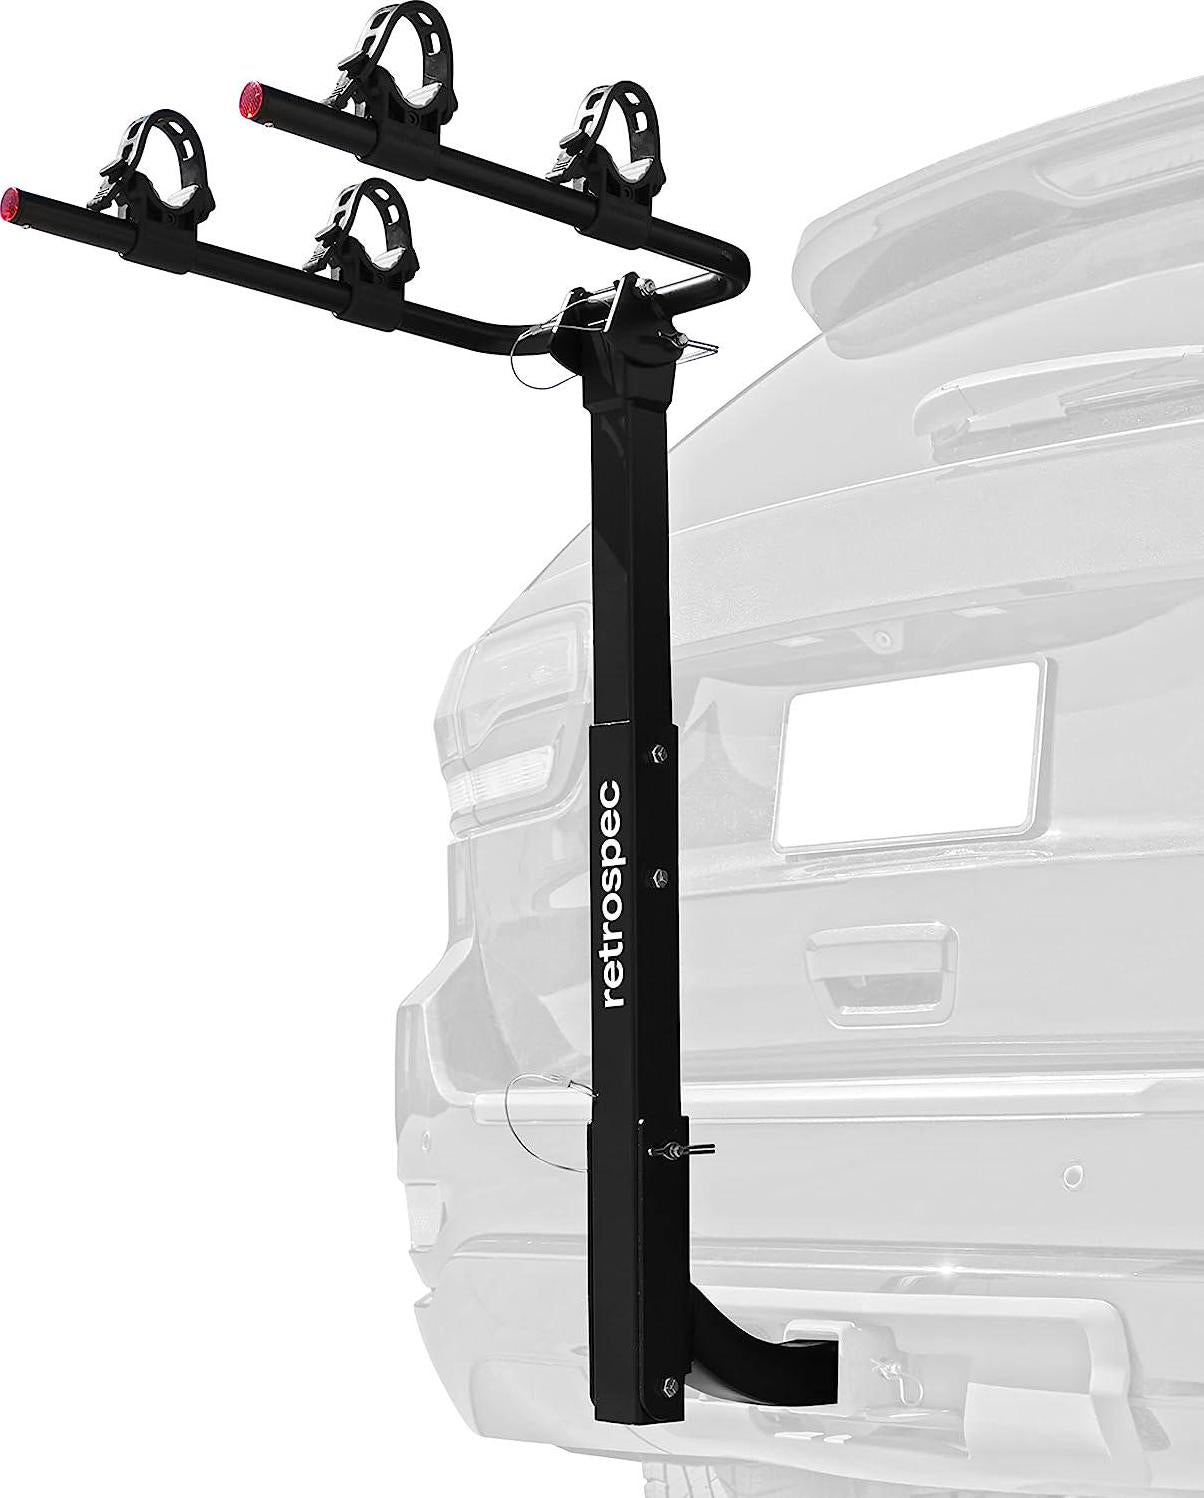 Lenox 2-5 - Bike Hitch Rack for Cars, Trucks, SUVs with 2 Hitch | Foldable Steel Frame with Anti-Rattle Adapter, Tie Down Cradles and Straps - Fits Most Frames-